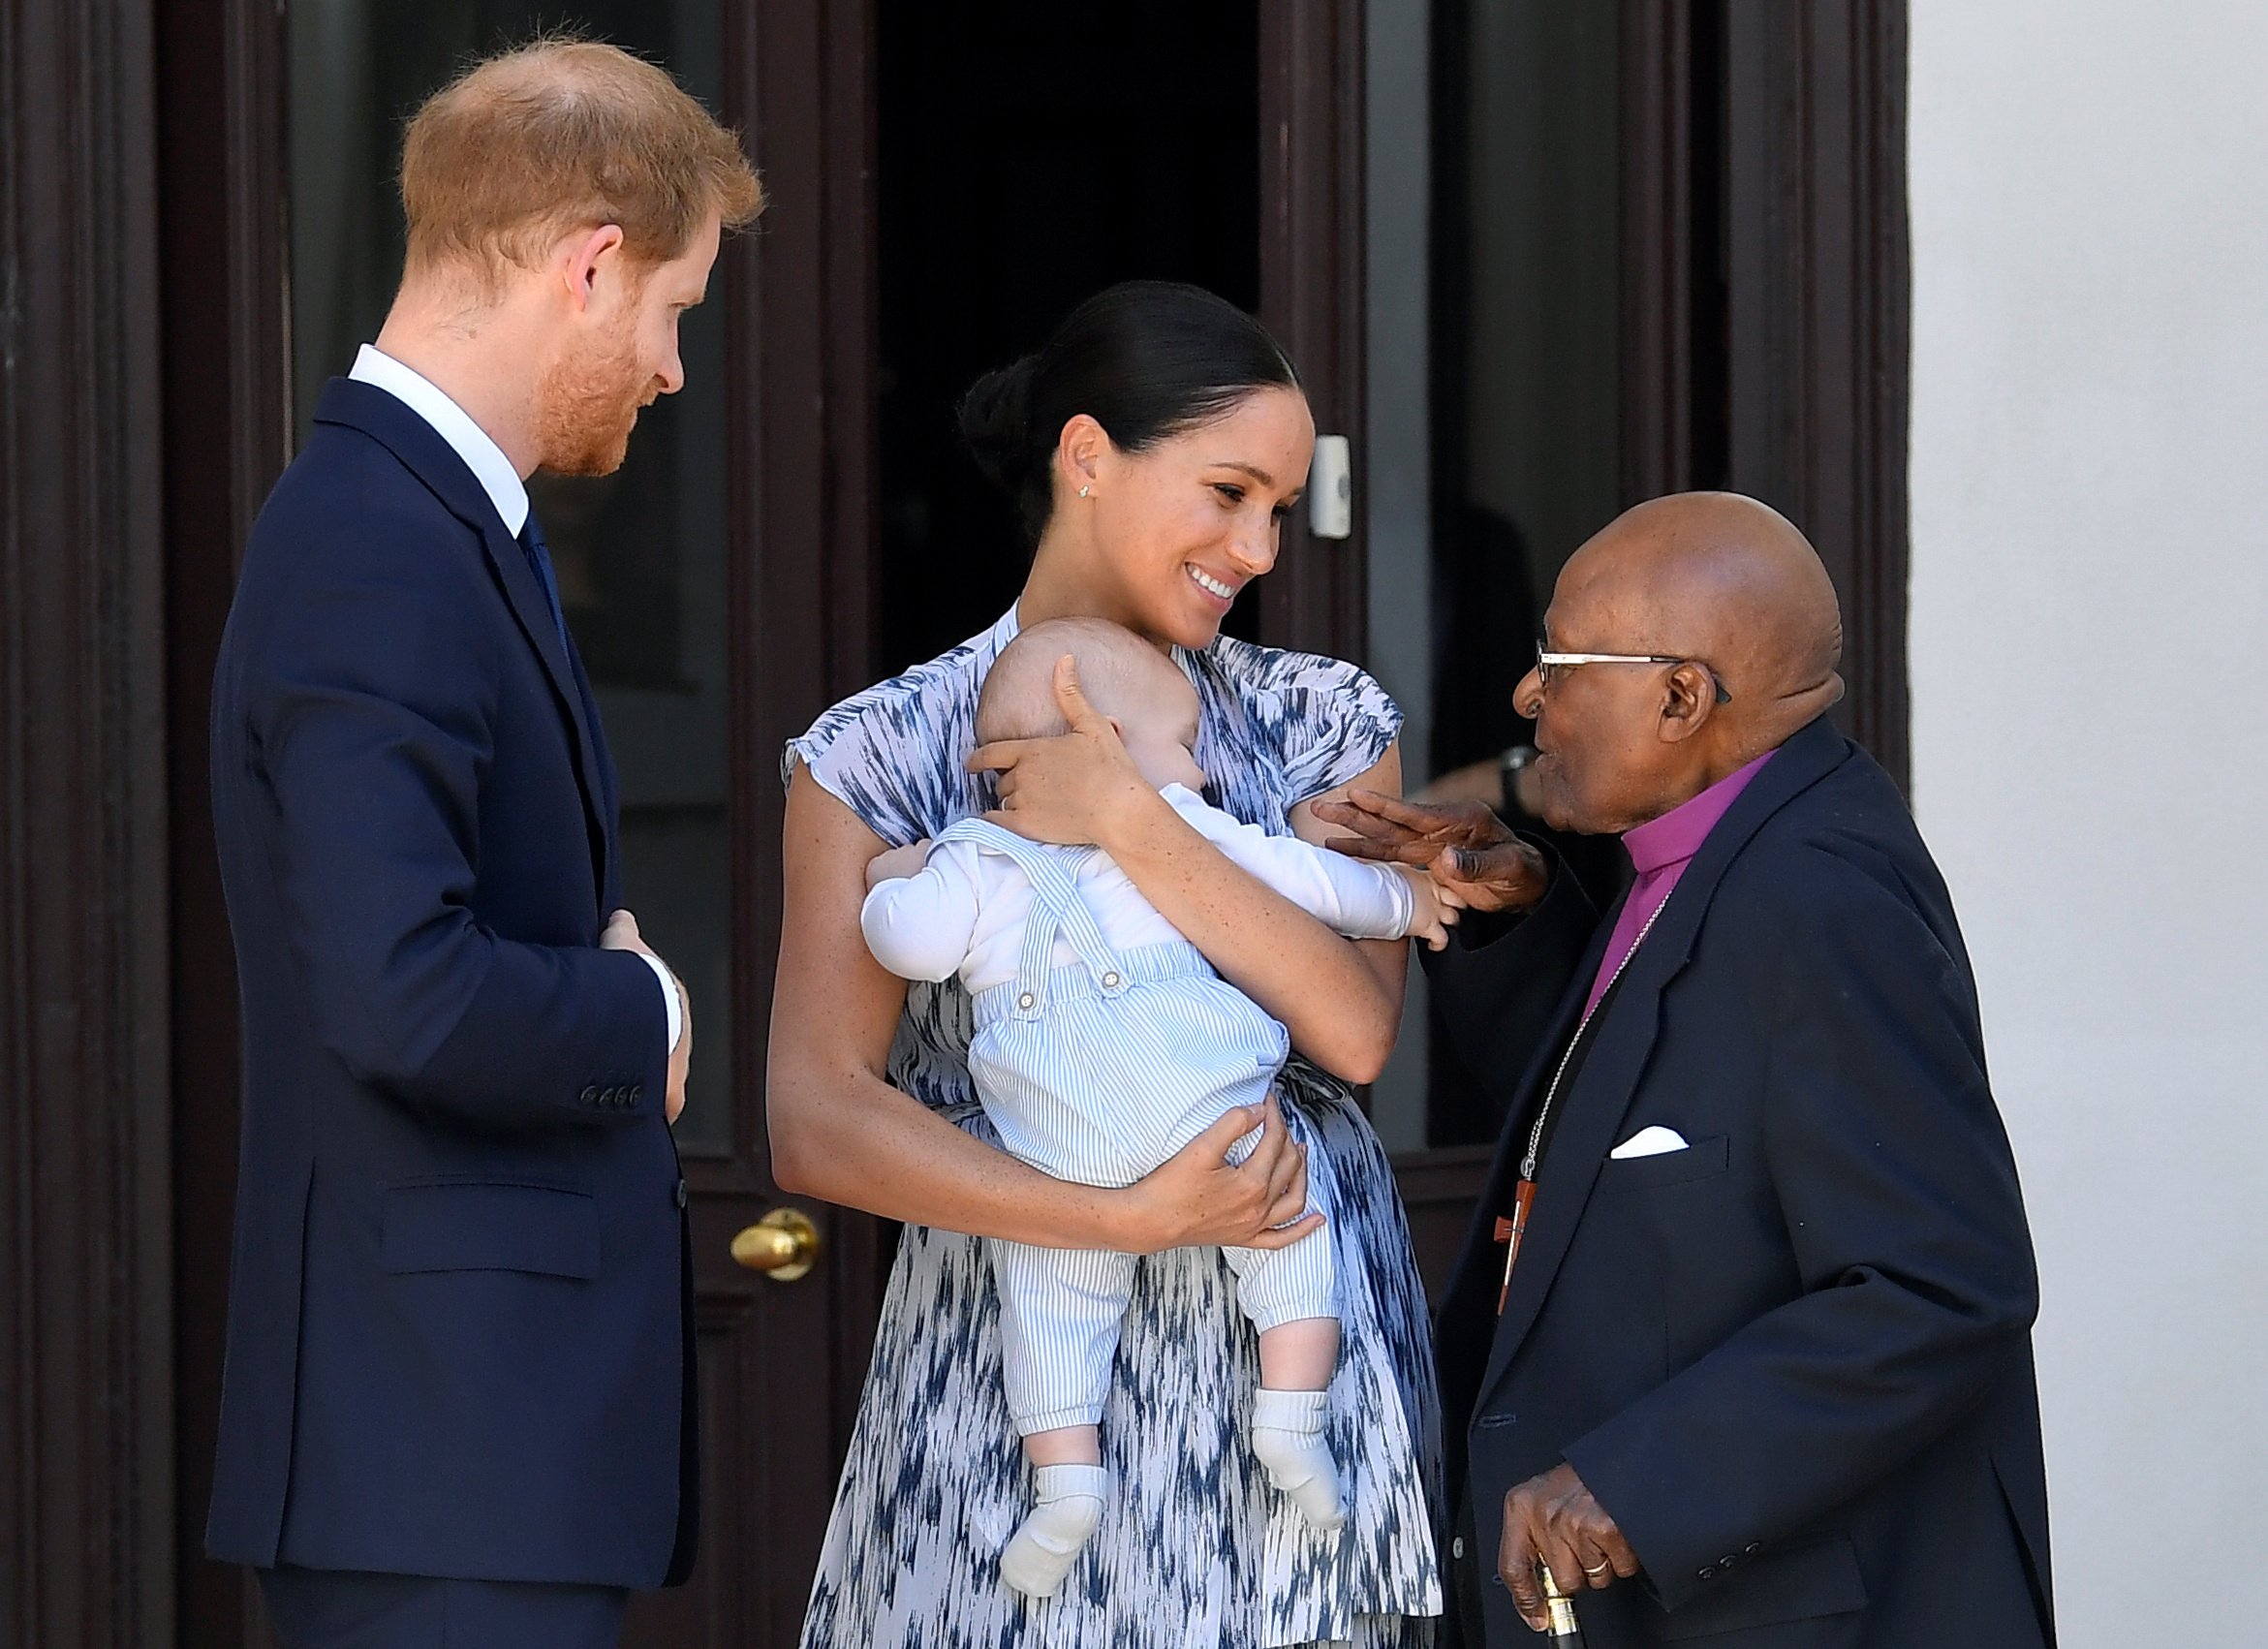 Prince Harry, Meghan Markle, and their son Archie meet Archbishop Desmond Tutu on September 25, 2019 | Photo: GettyImages